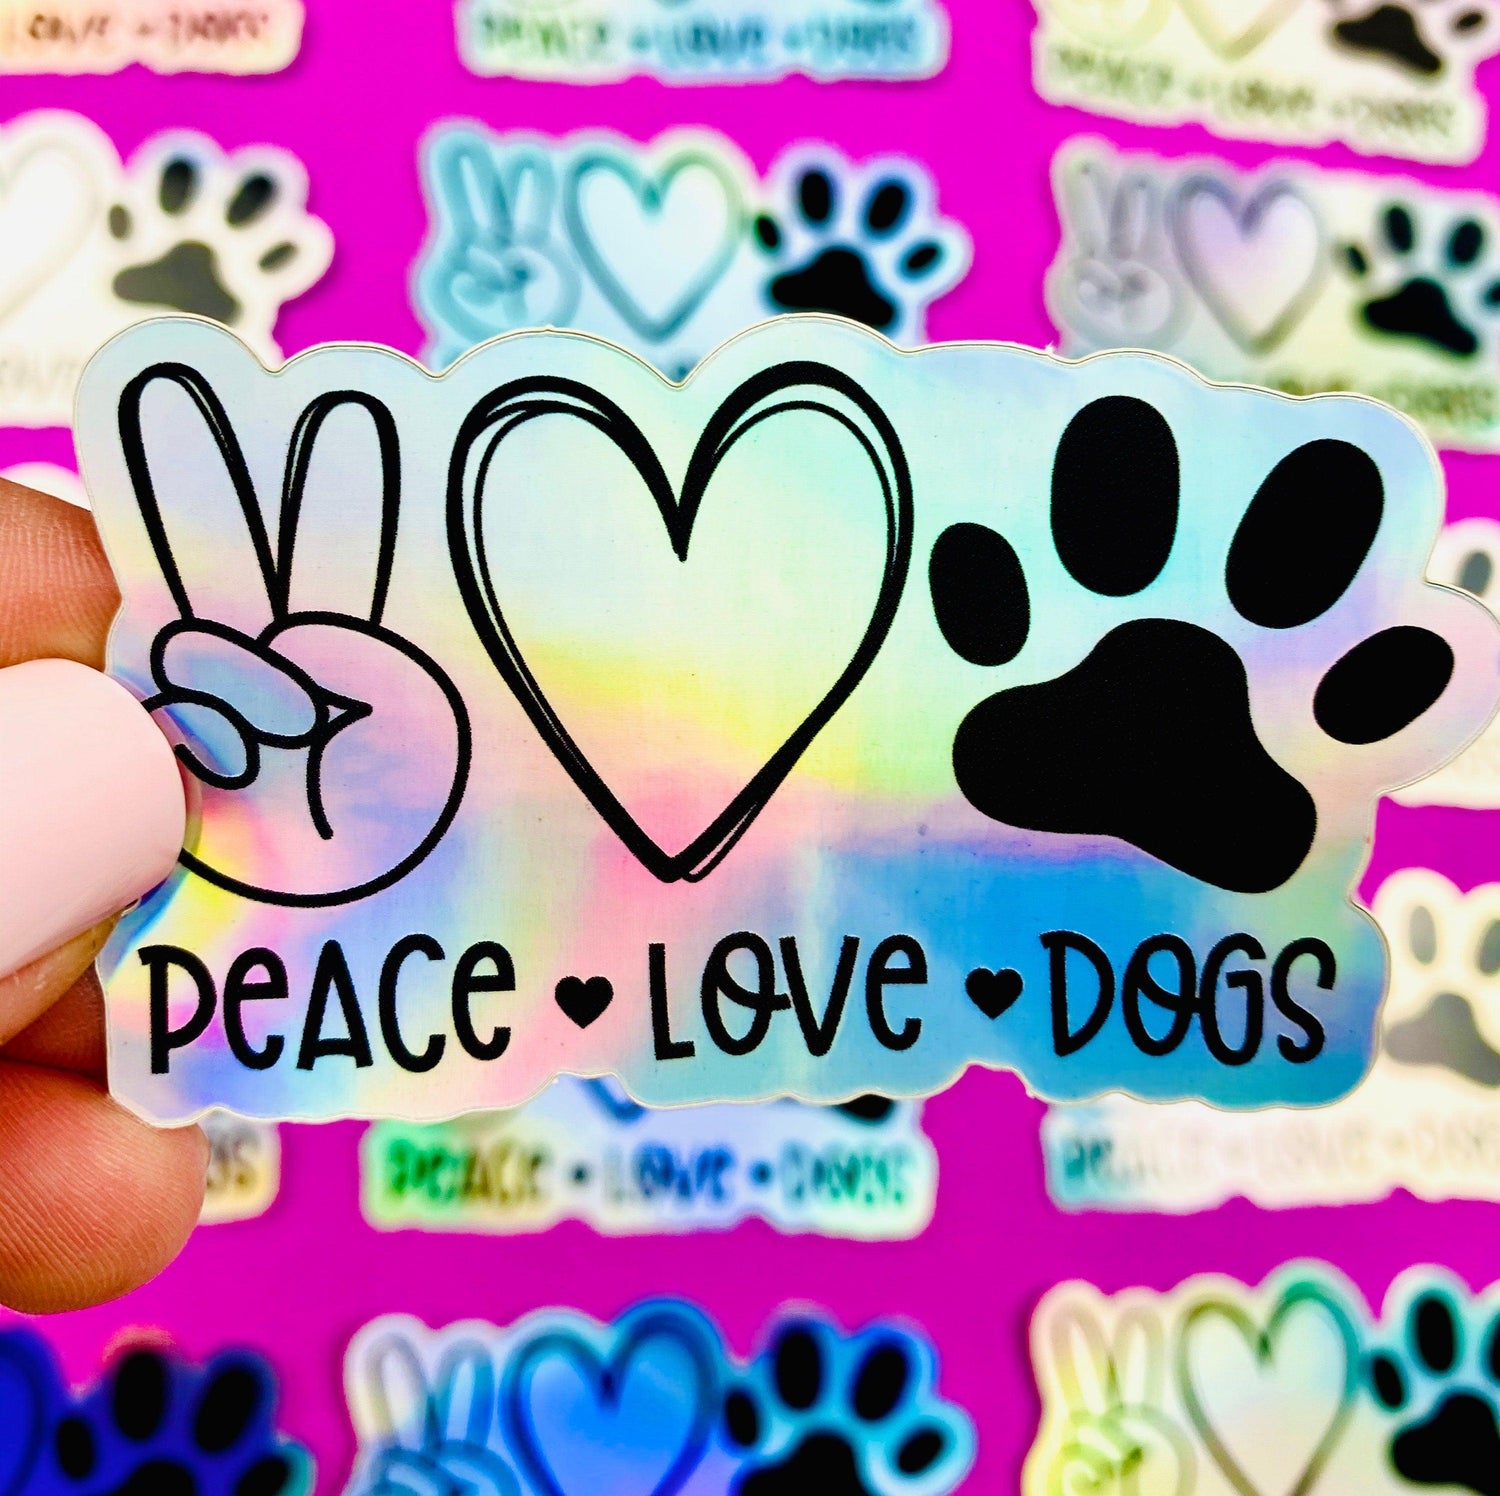 Peace Love Dogs Sticker Hologram Dog Decal for Car, Hydroflask, Pretty Dog Gift for Dog Mom, Dog Car Sticker, Dog Water Bottle Sticker - Ottos Grotto :: Stickers For Your Stuff